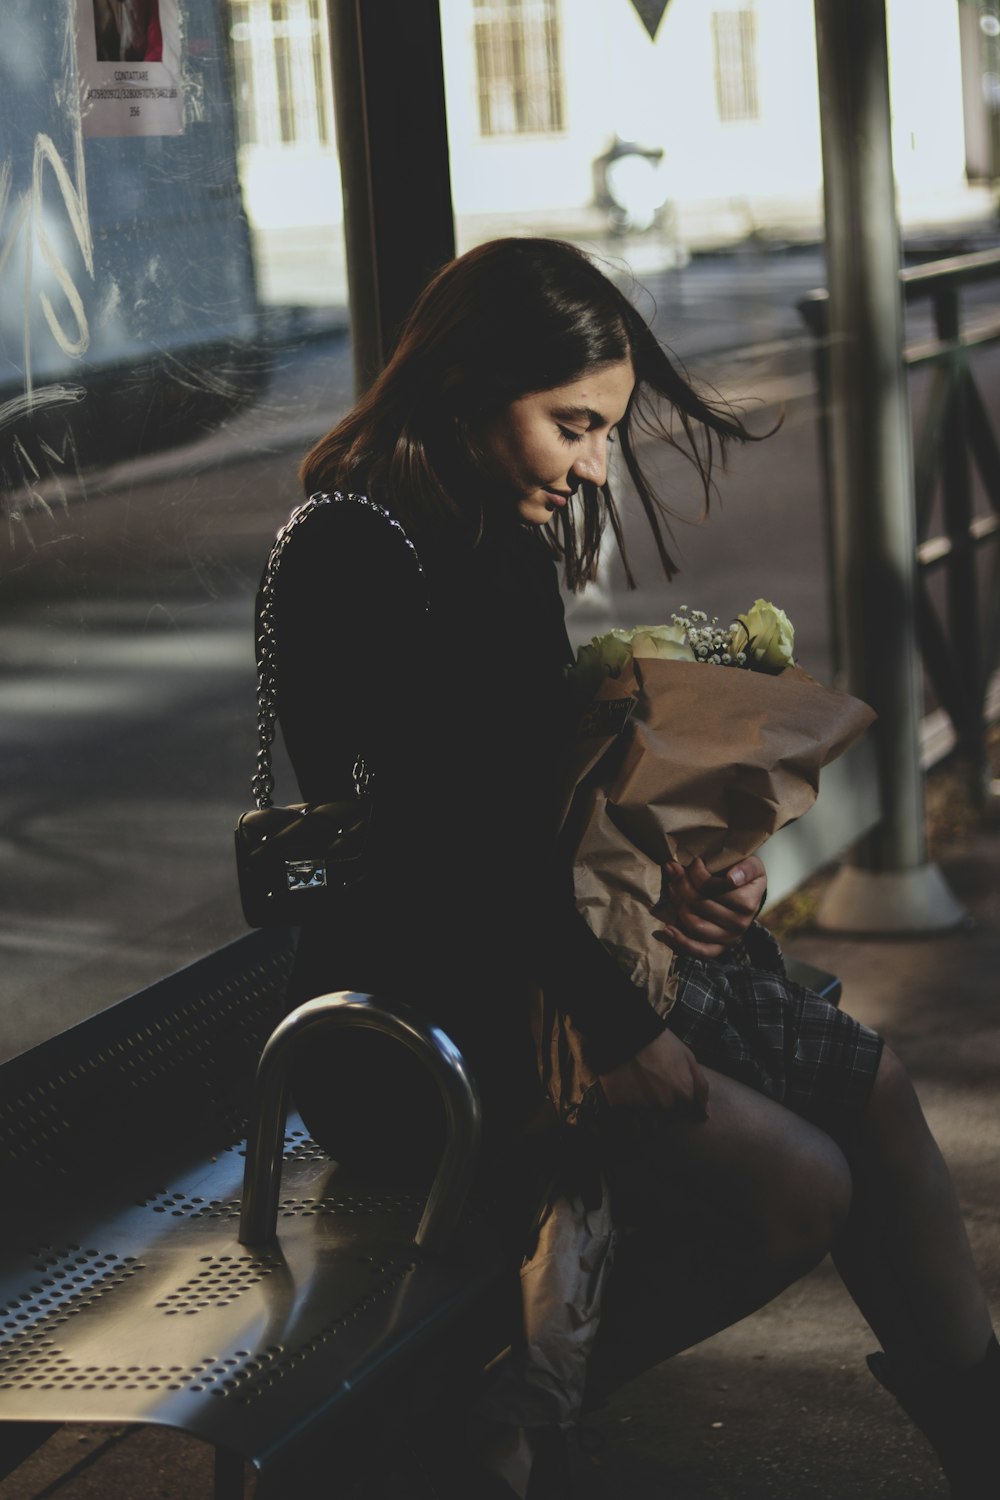 a woman sitting on a bench with a sandwich in her hand